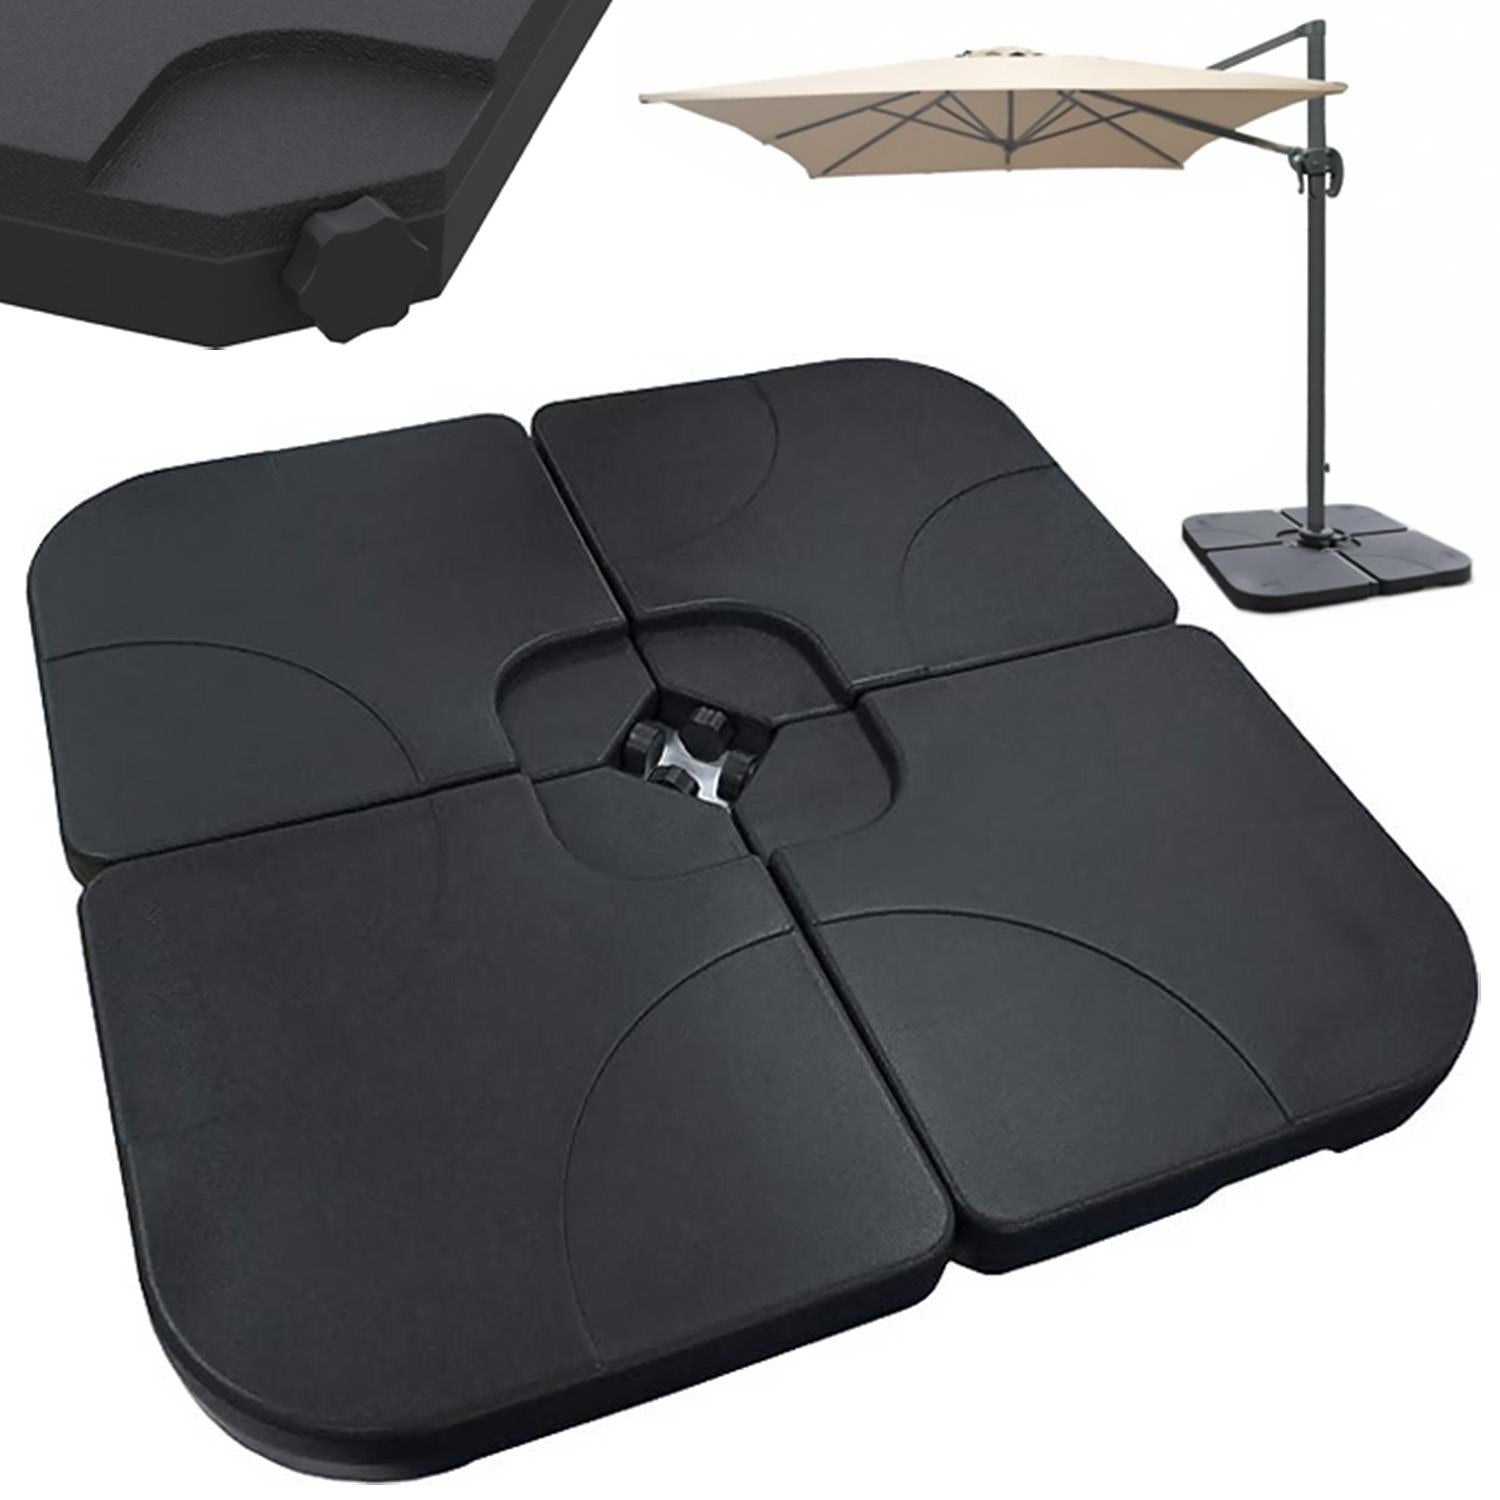 Cantilever Parasol Square Base by GEEZY - UKBuyZone